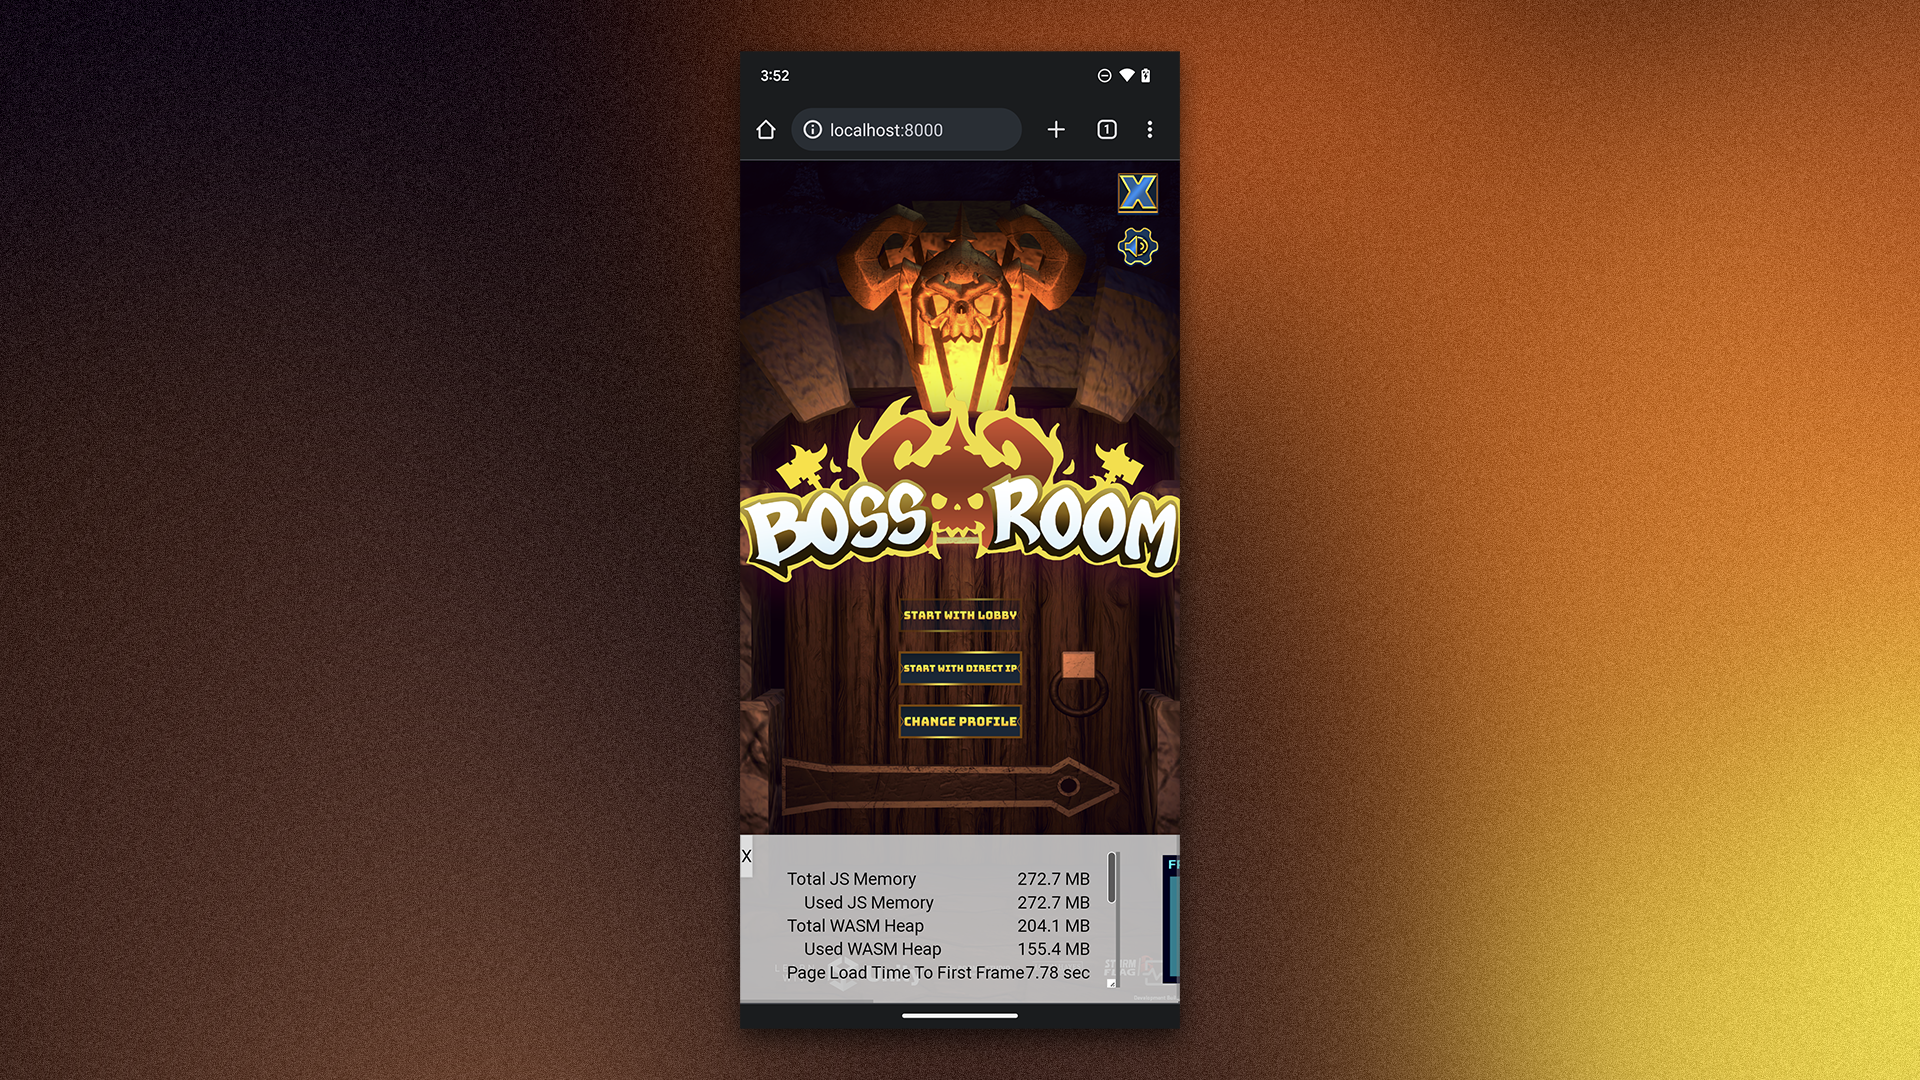 Boss Room demo project running on mobile browser with the new web diagnostic tool